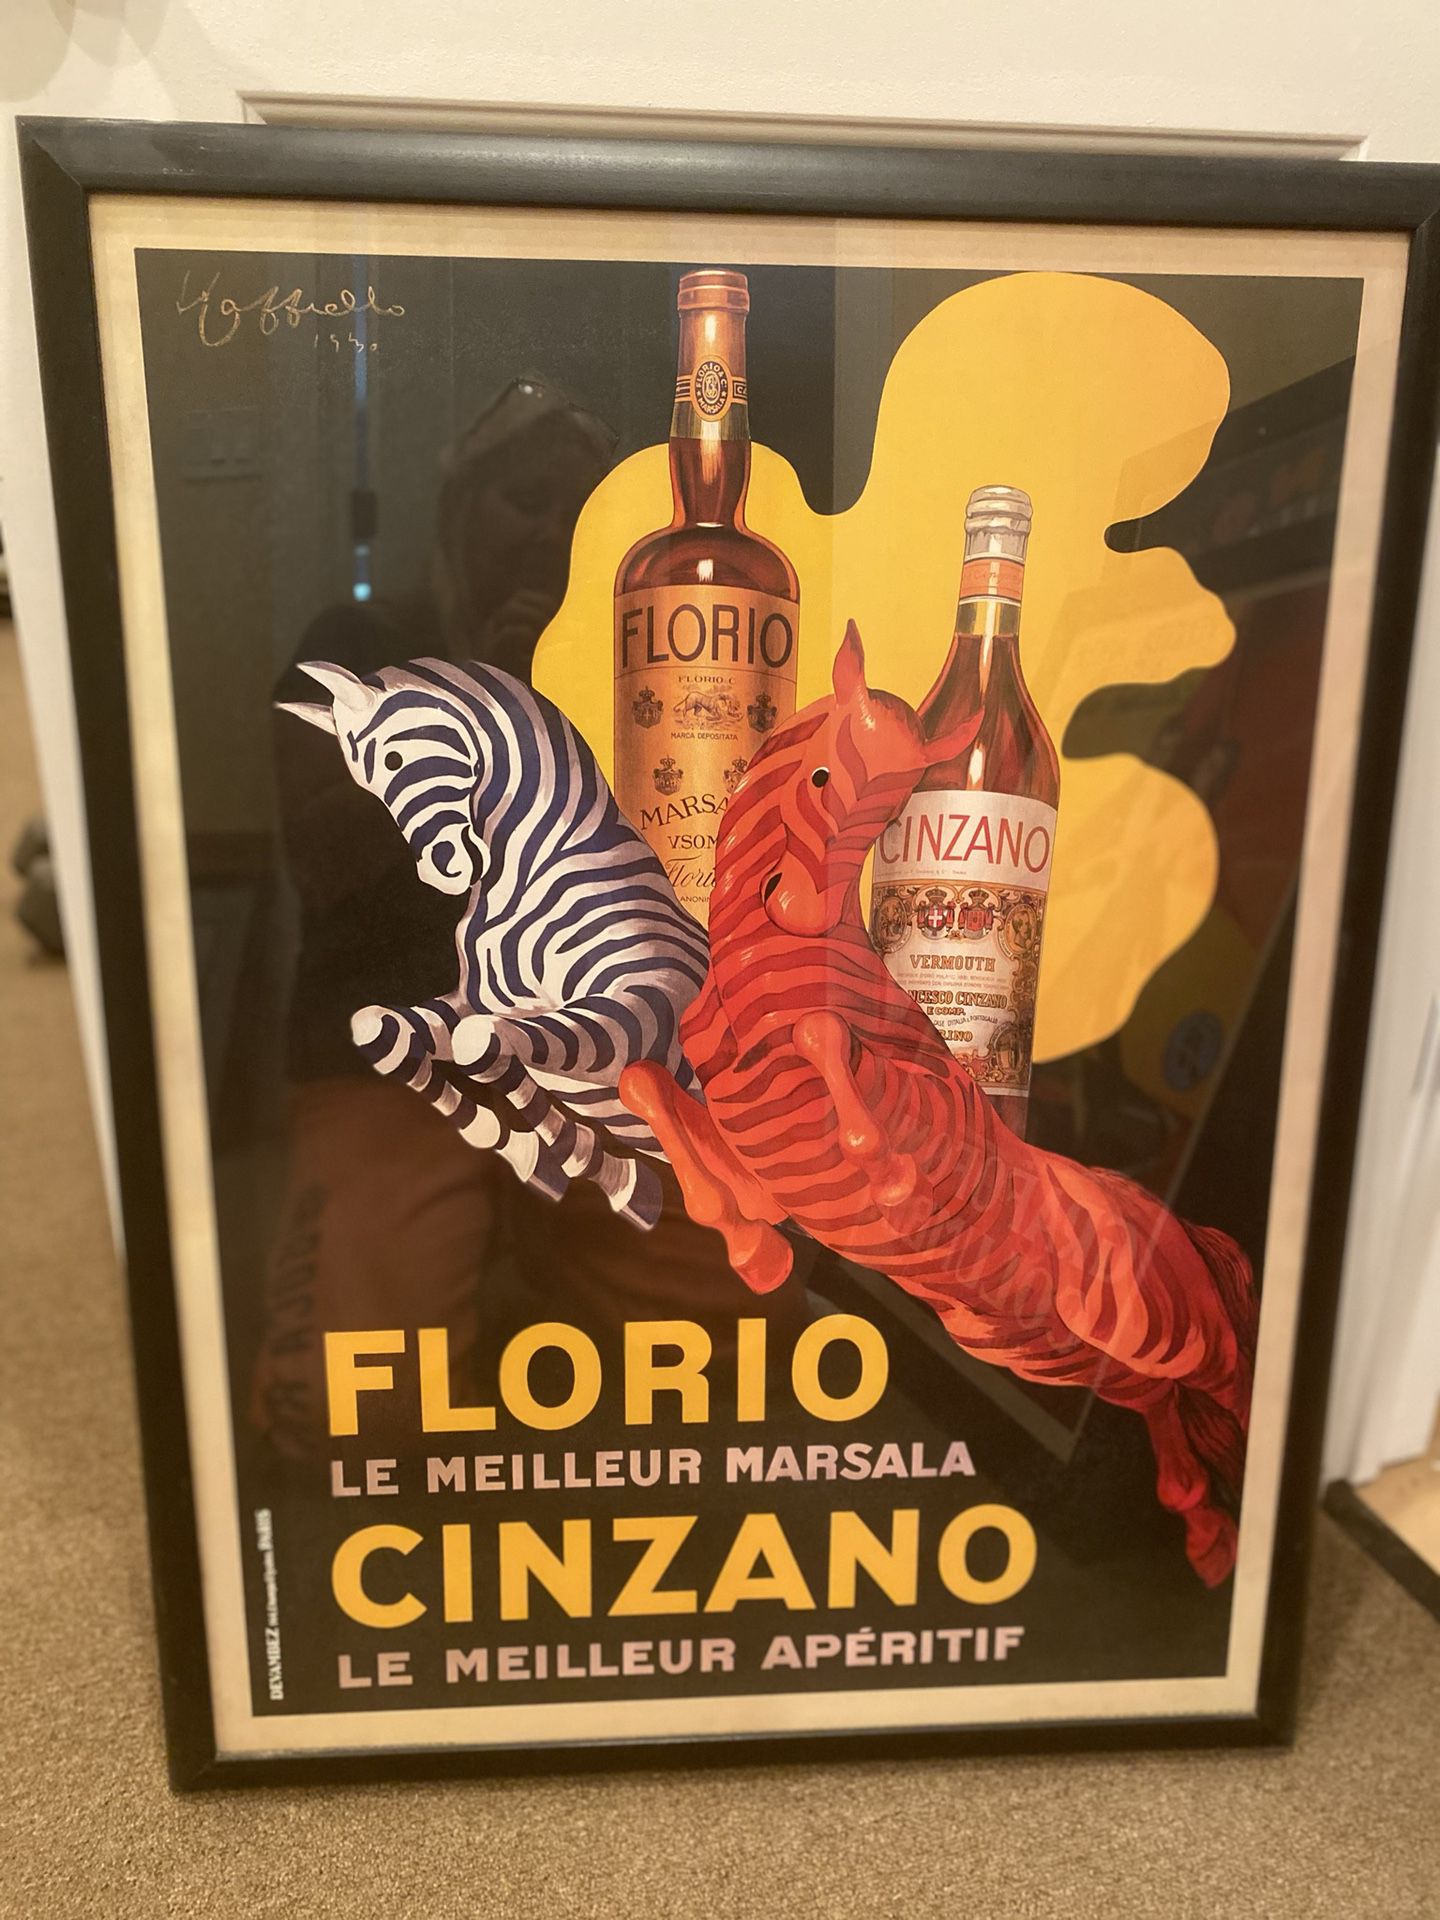 Signed Florio Cinzano professionally framed picture 32”x25” great pic